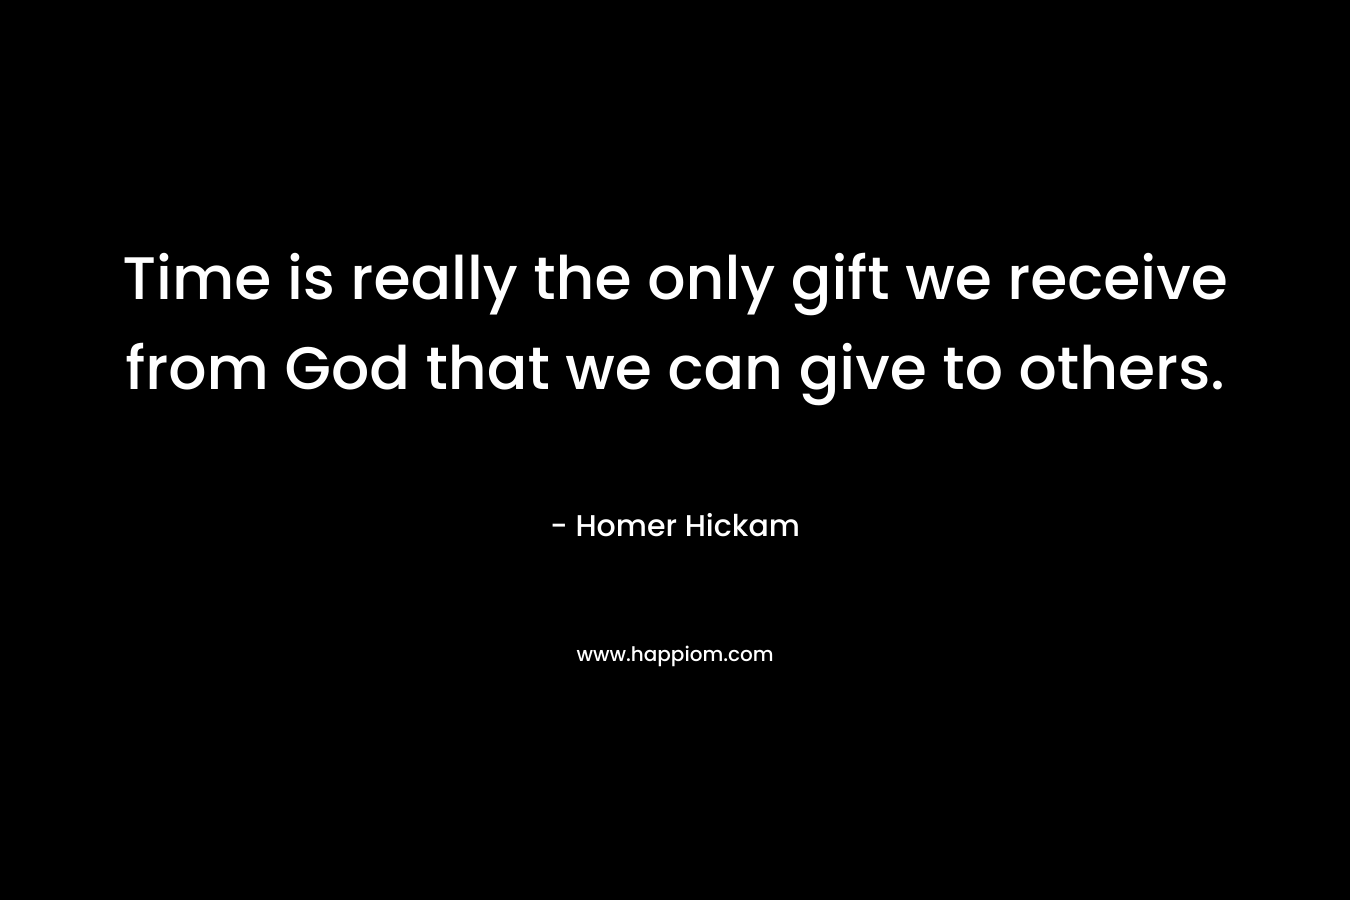 Time is really the only gift we receive from God that we can give to others.